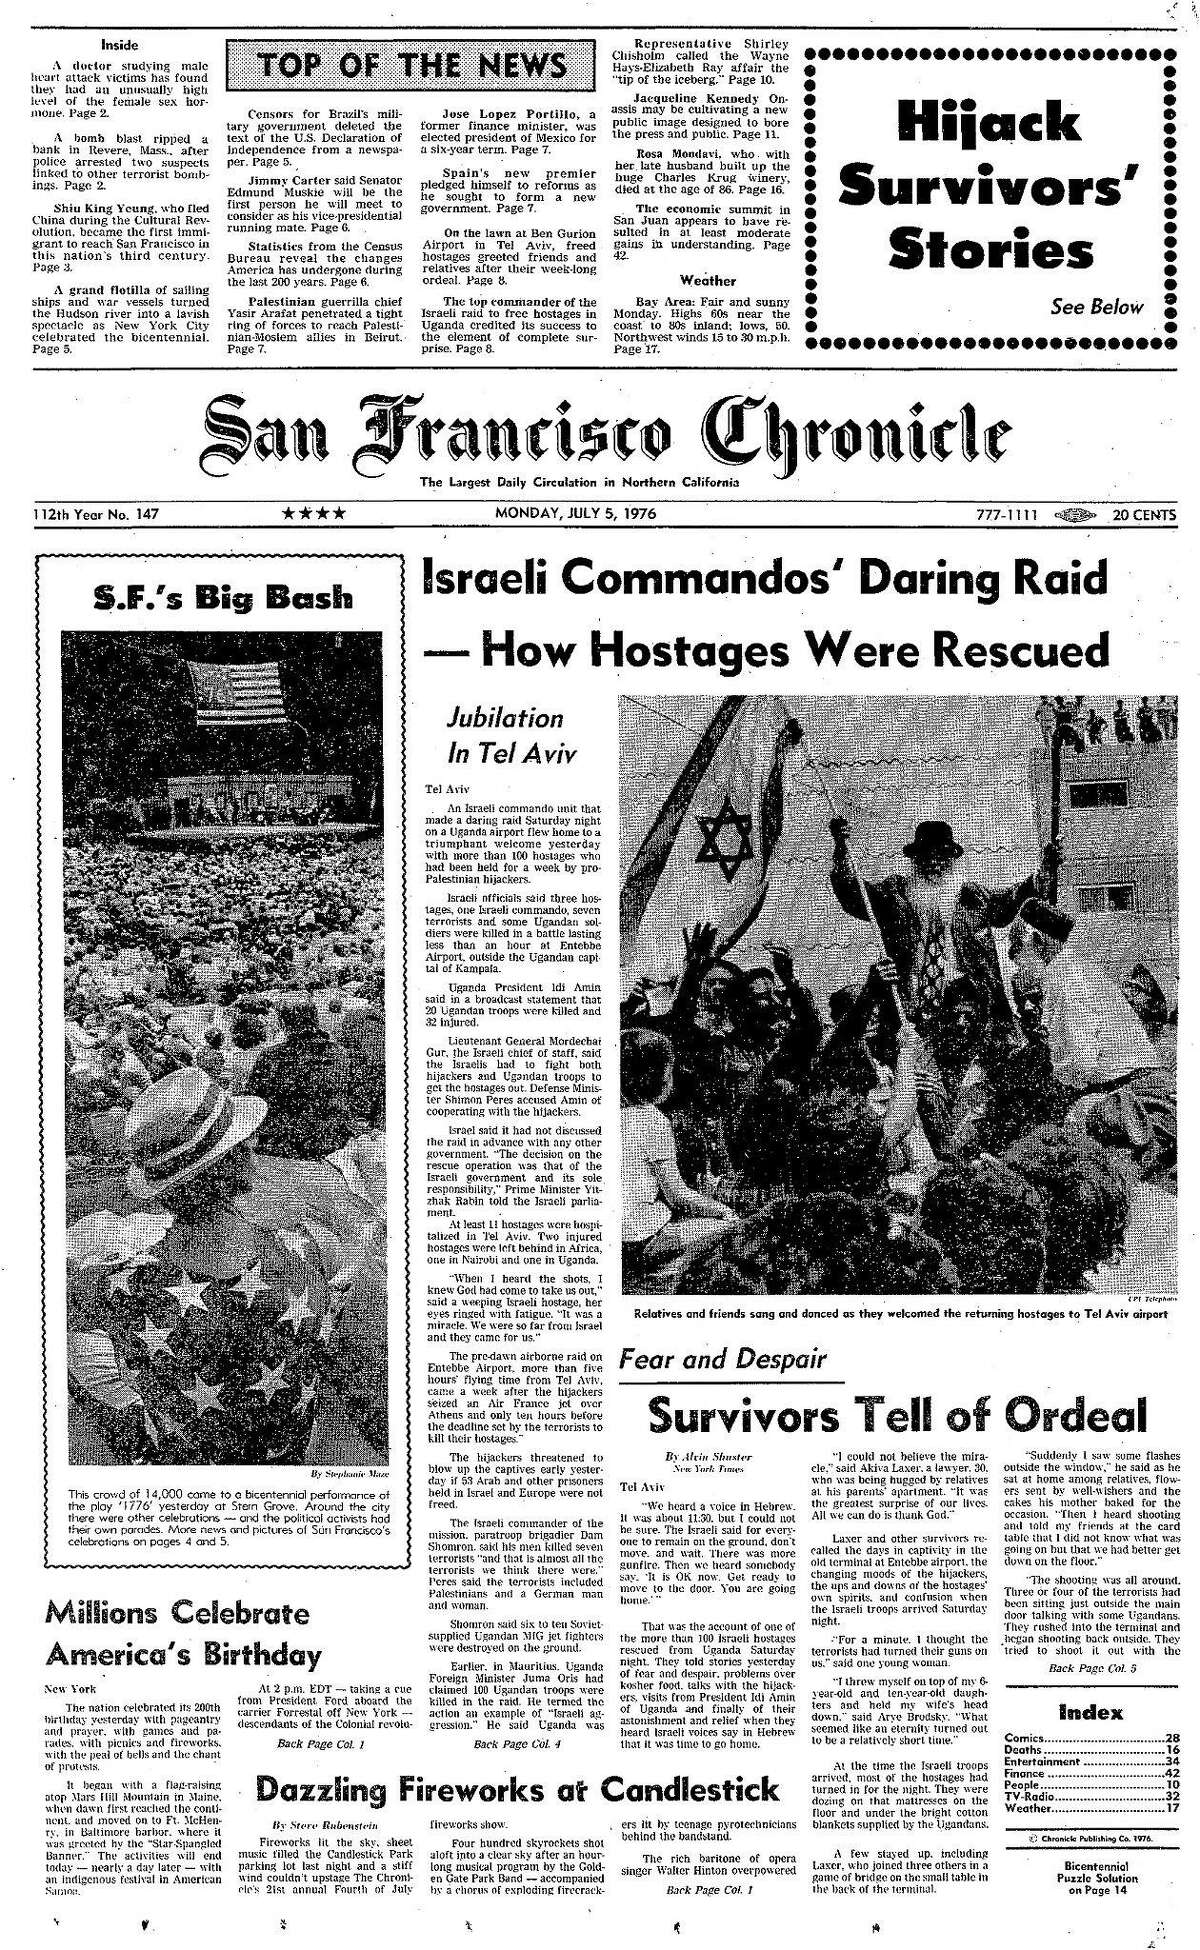 Historic Chronicle Front Page July 05, 1976 front page San Francisco celebrates Double Bicentennial Chron365, Chroncover